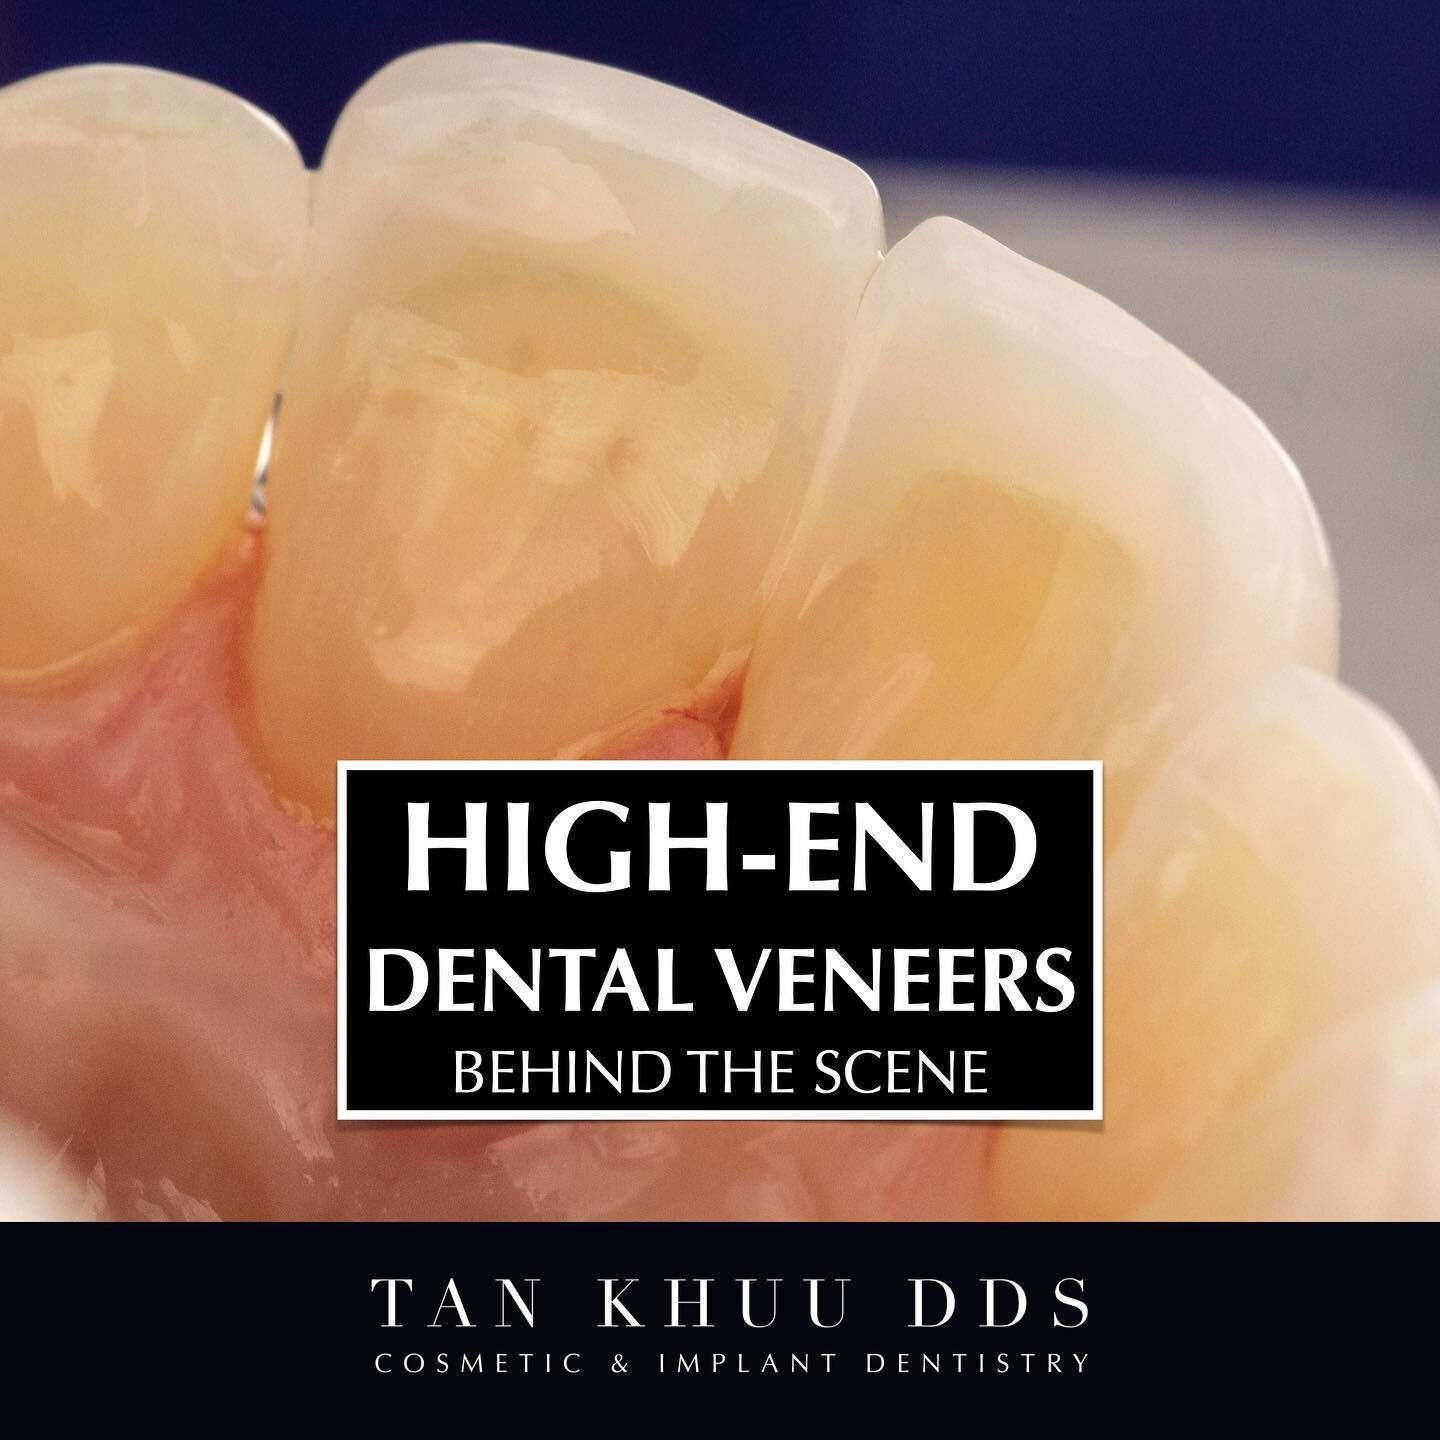 What makes a  dental veneer high-end?

High-end dental veneers are made from premium raw materials by exceptional Master Ceramists. A great amount of both time and effort is expended to produce such beautiful work. 

For example, instead of using col